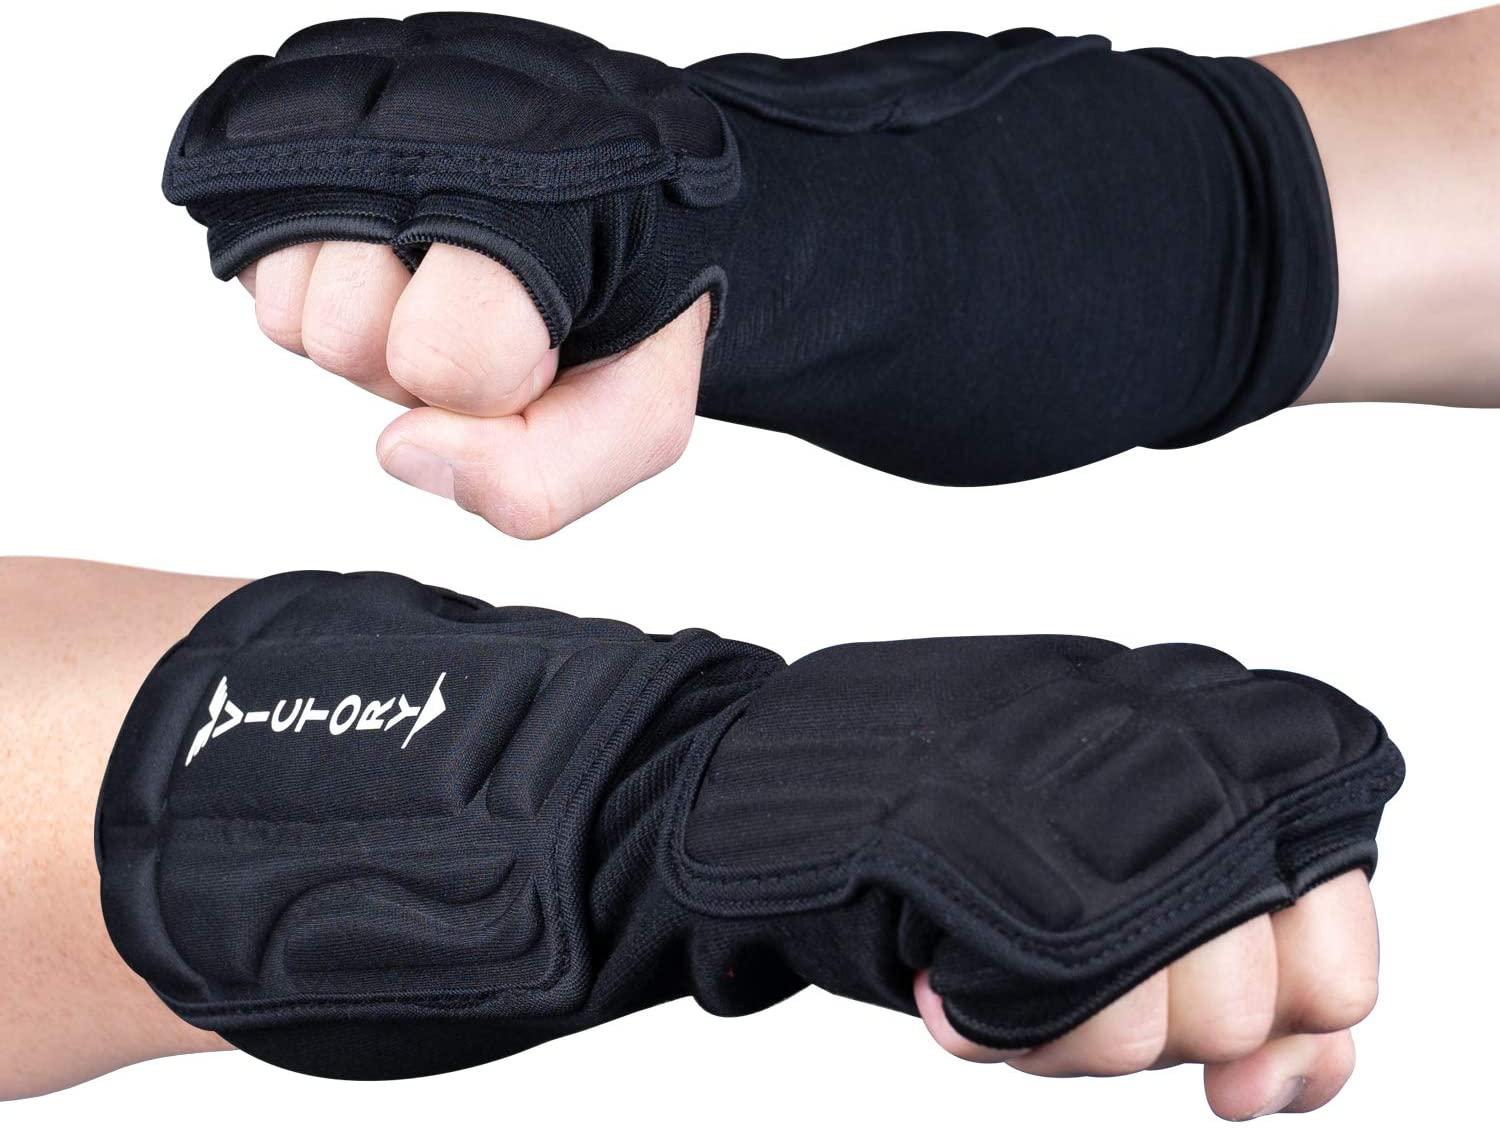 Kickboxing, Muay Thai MMA Martial Arts Hand/Forearm Armor Guards for Kids and Adults